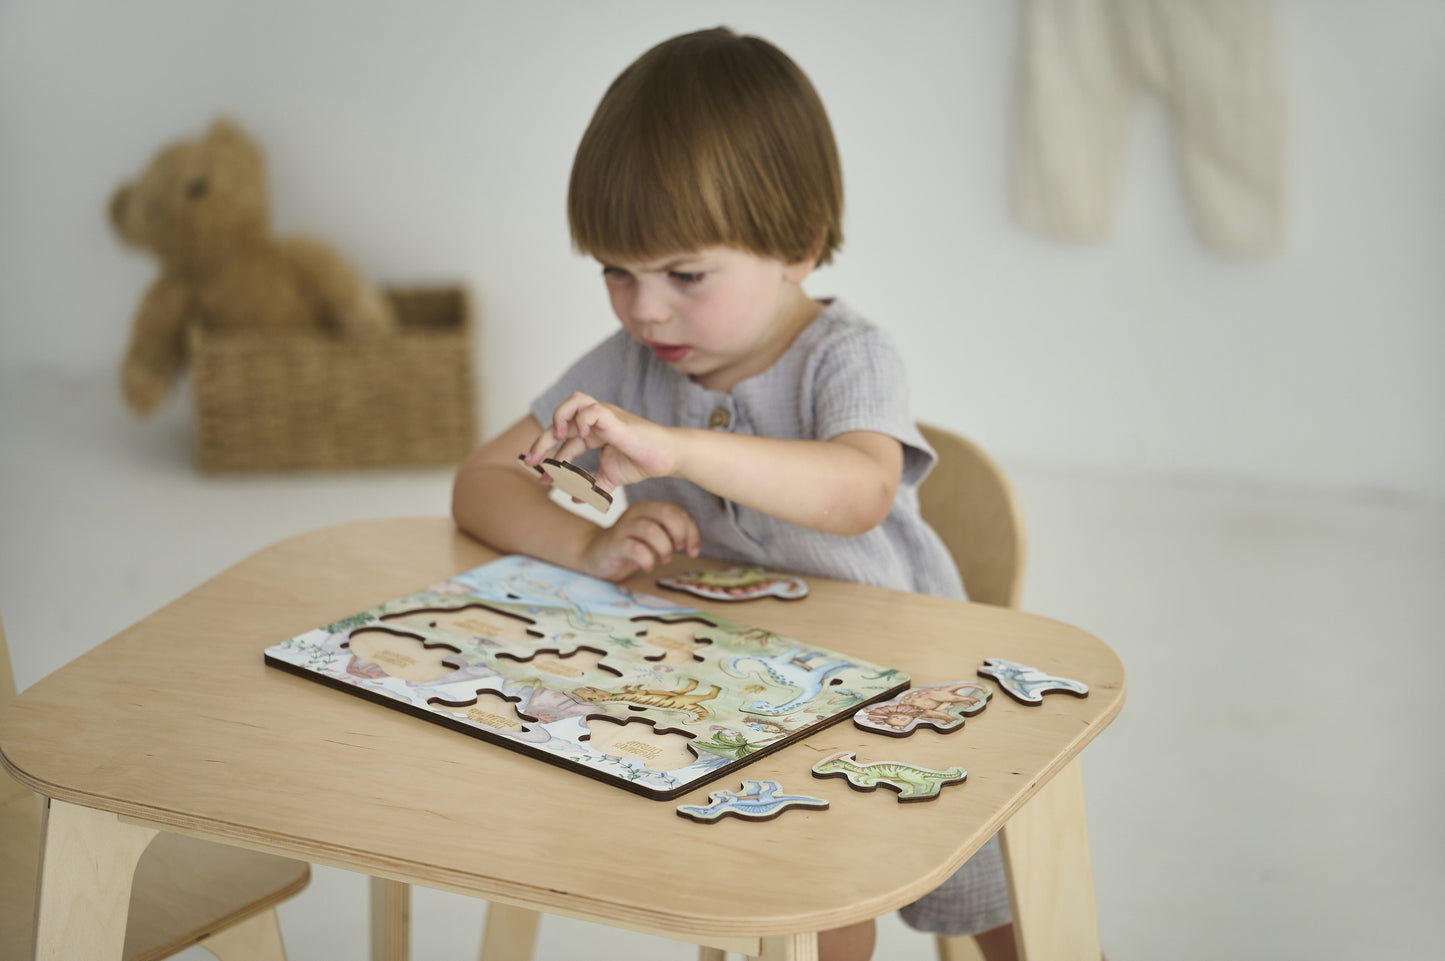 Dinosaurs Wooden Puzzle